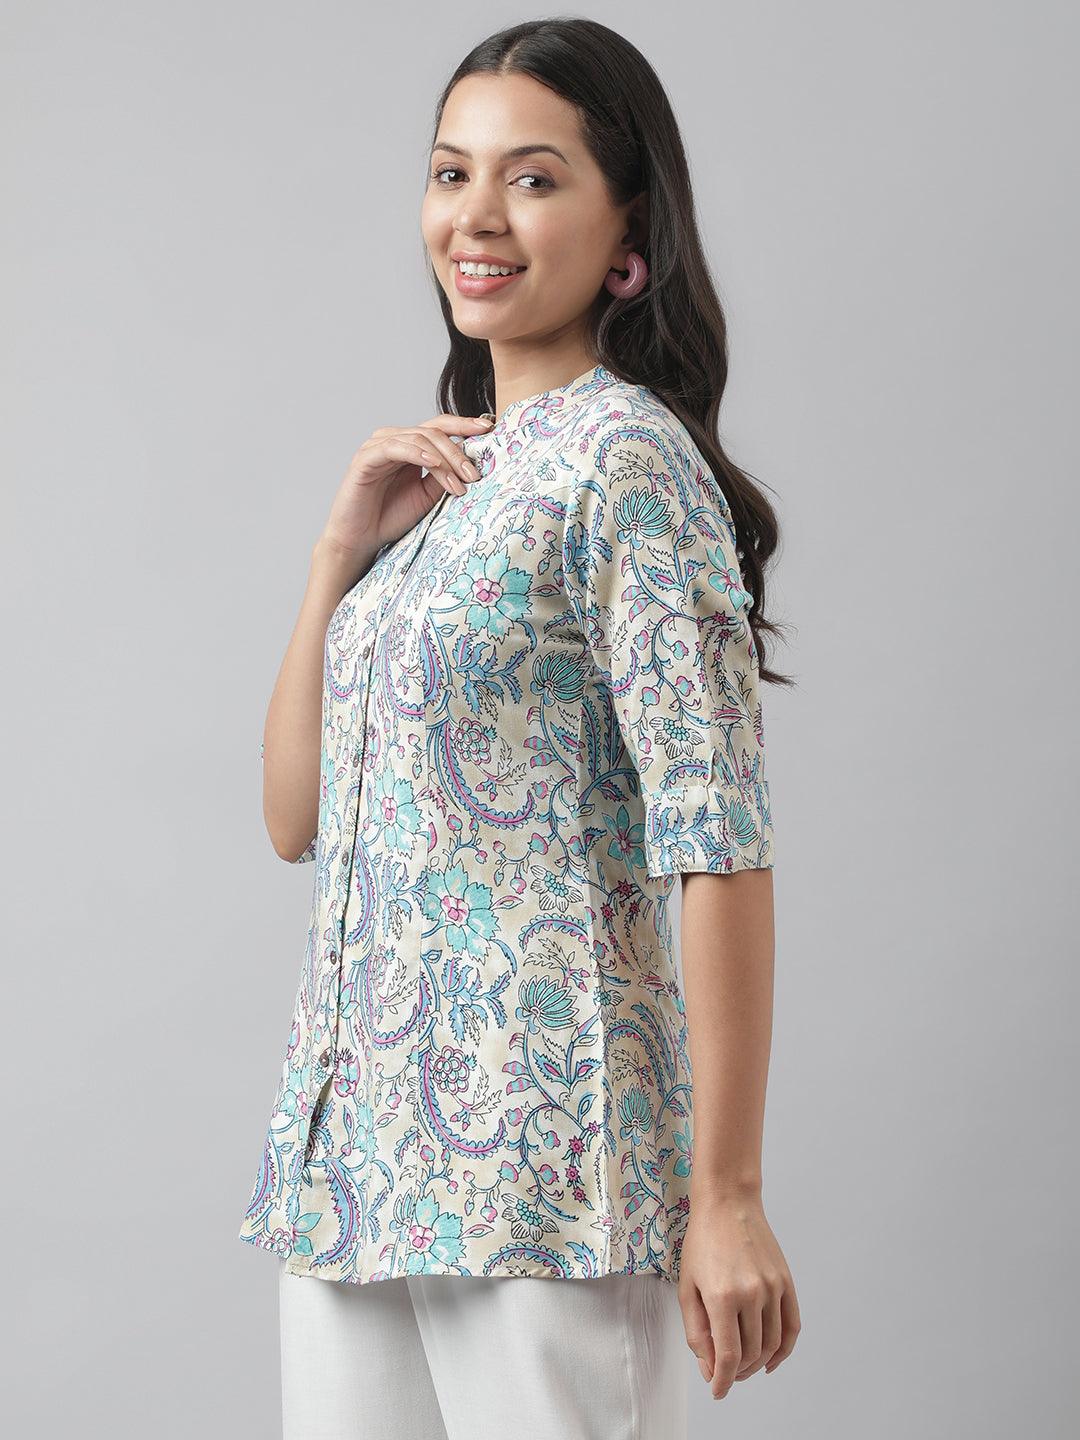 Divena Multi Floral Printed Rayon A-line Shirt Style Top - divena world